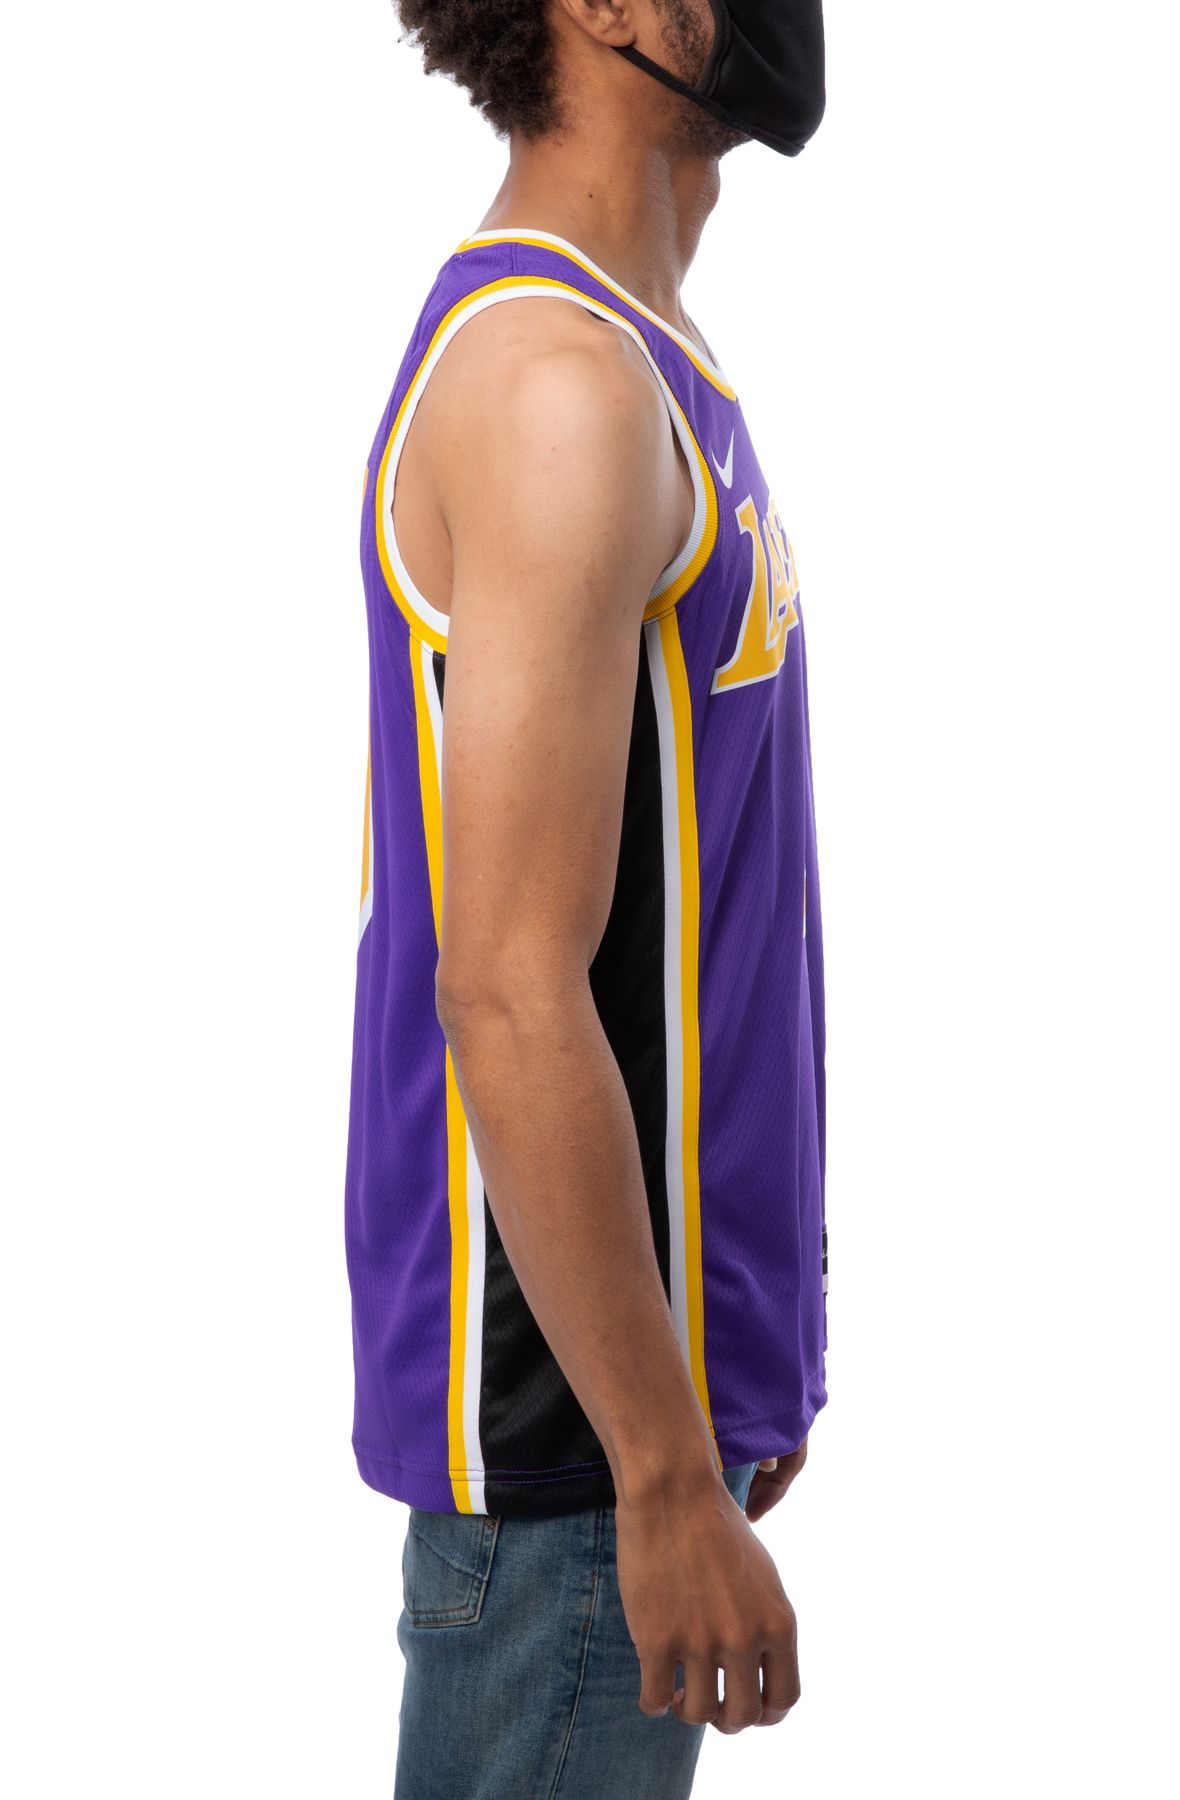 Kyle Kuzma Los Angeles Lakers jersey size 52 (fits more large